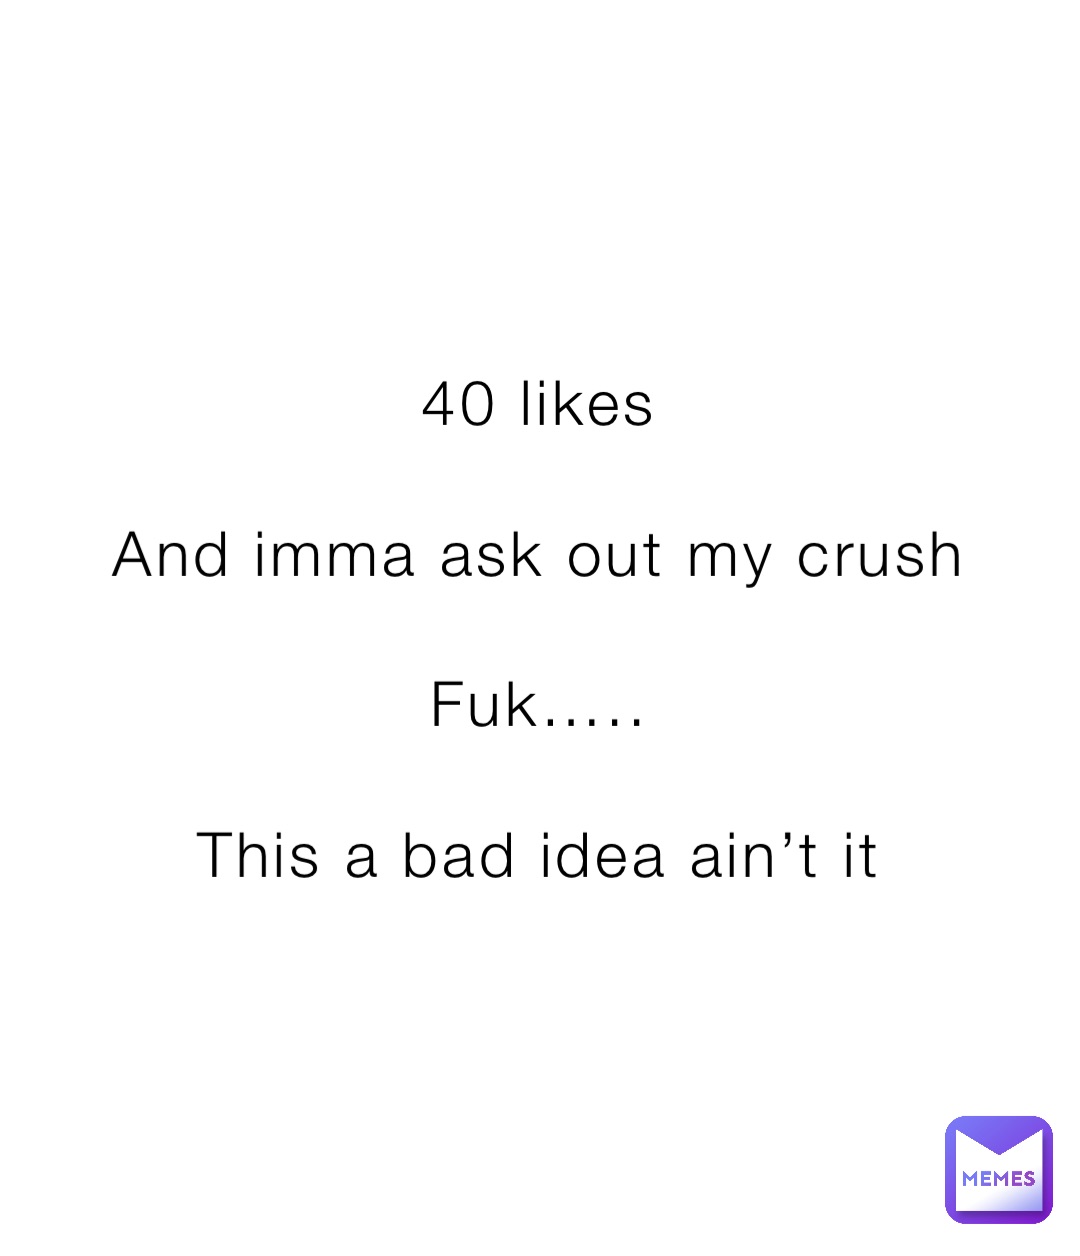 40 likes

And imma ask out my crush

Fuk…..

This a bad idea ain’t it